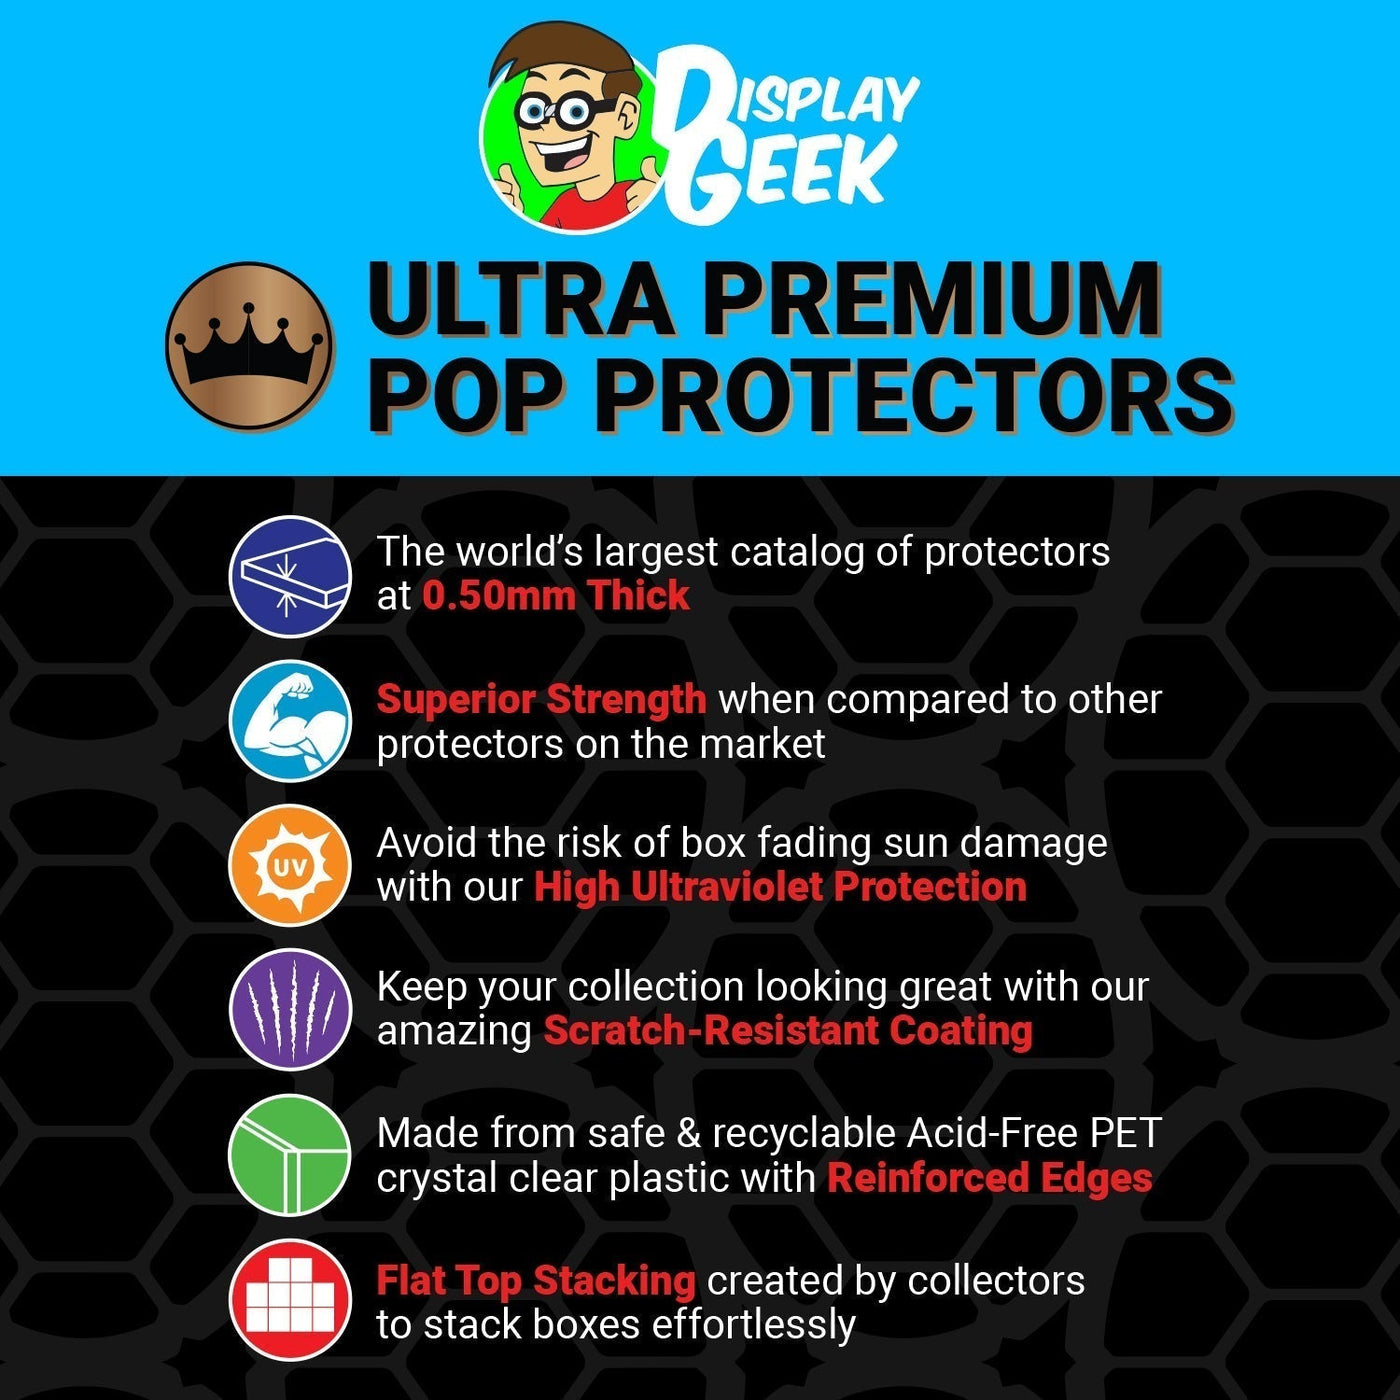 Pop Protector for 6 inch Giant Lady Transparent Pink #99 Super Funko Pop on The Protector Guide App by Display Geek